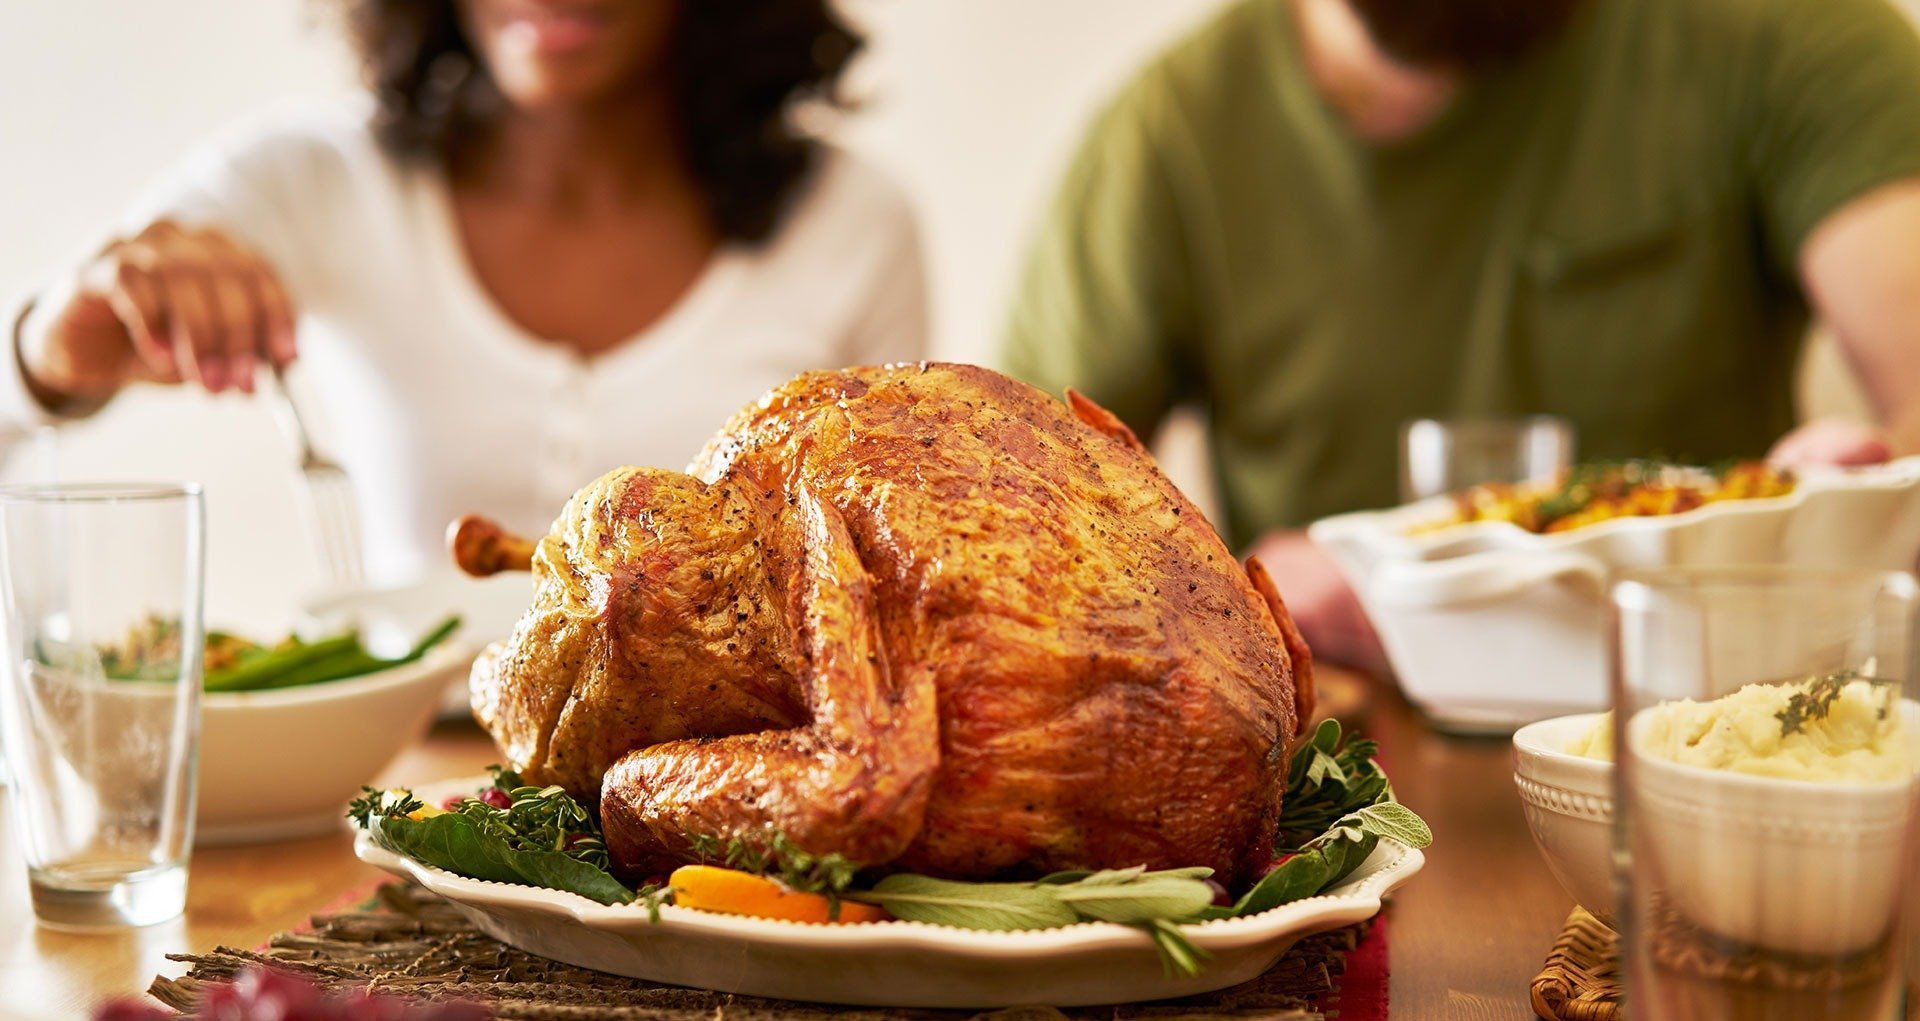 Our Guide to Reducing Your Thanksgiving FoodPrint